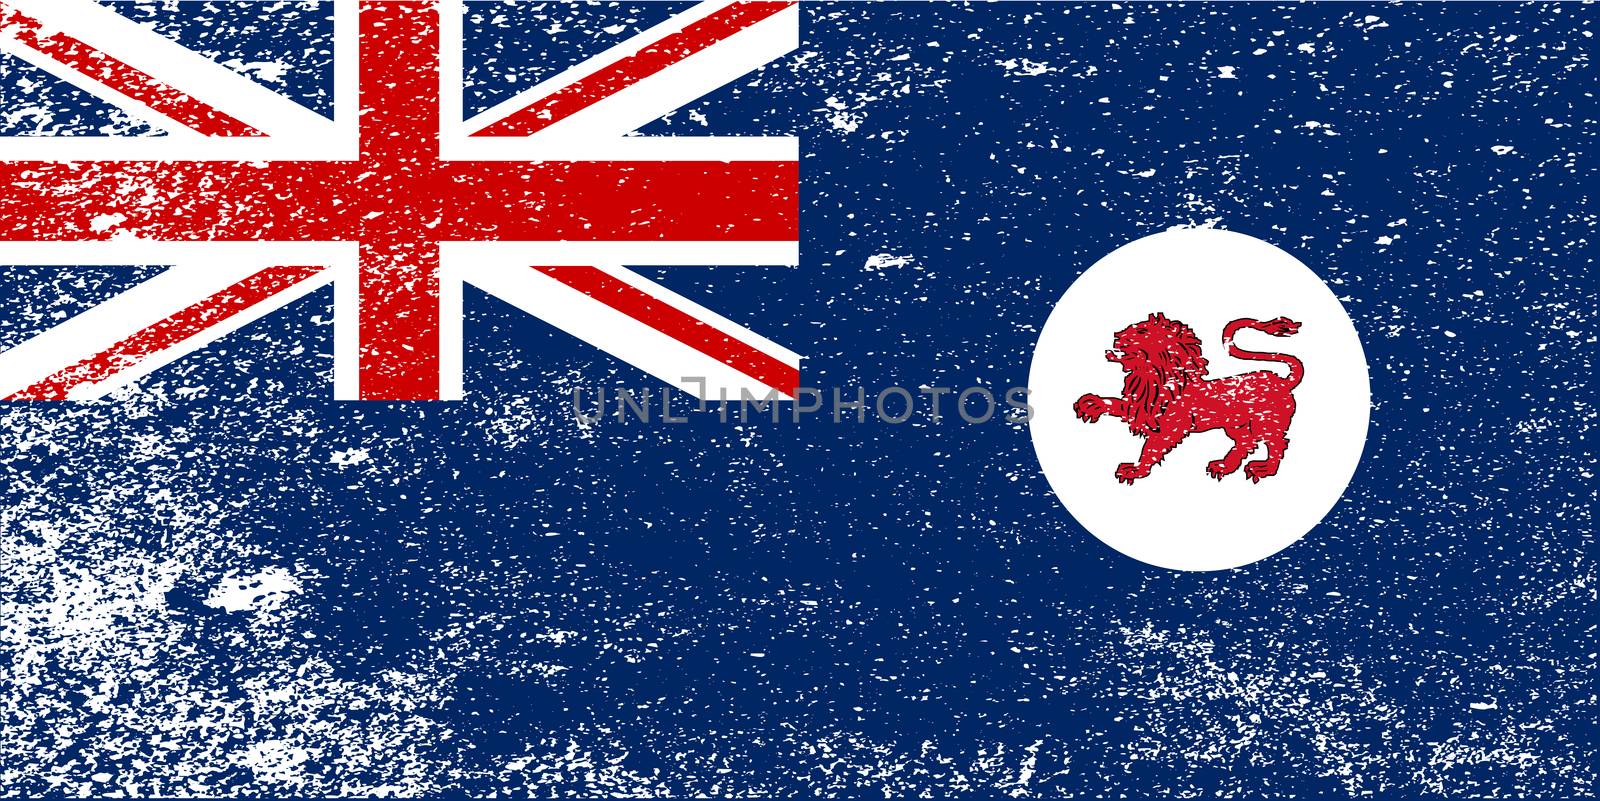 The flag of the Australian state of Tasmania with grunge